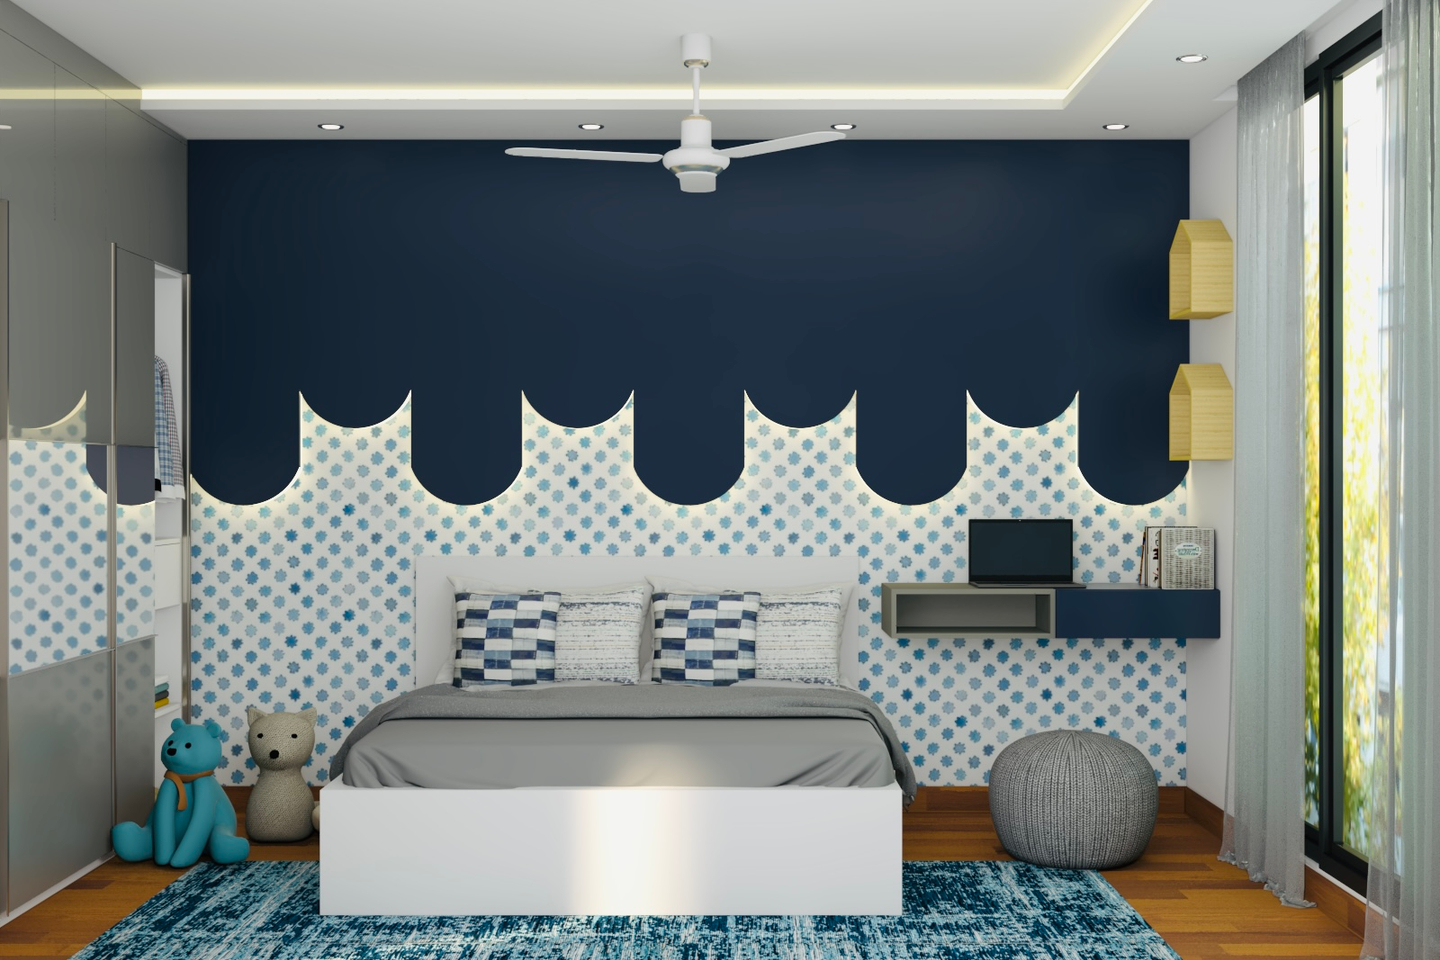 Kids' Room With King Size Bed - Livspace